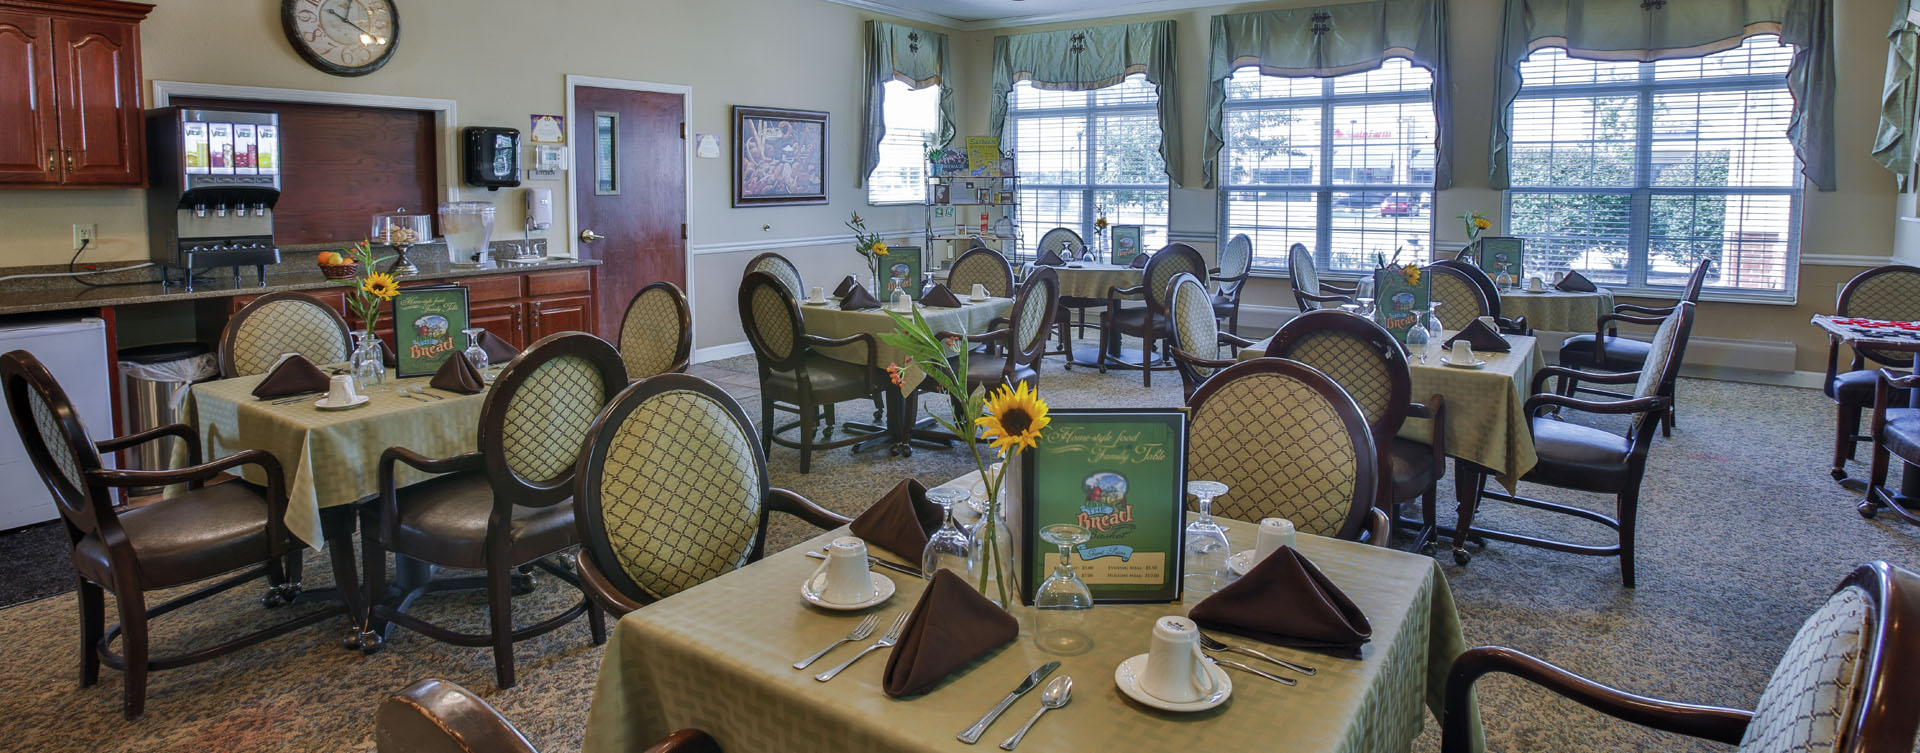 Enjoy homestyle food with made-from-scratch recipes in our dining room at Bickford of Lafayette